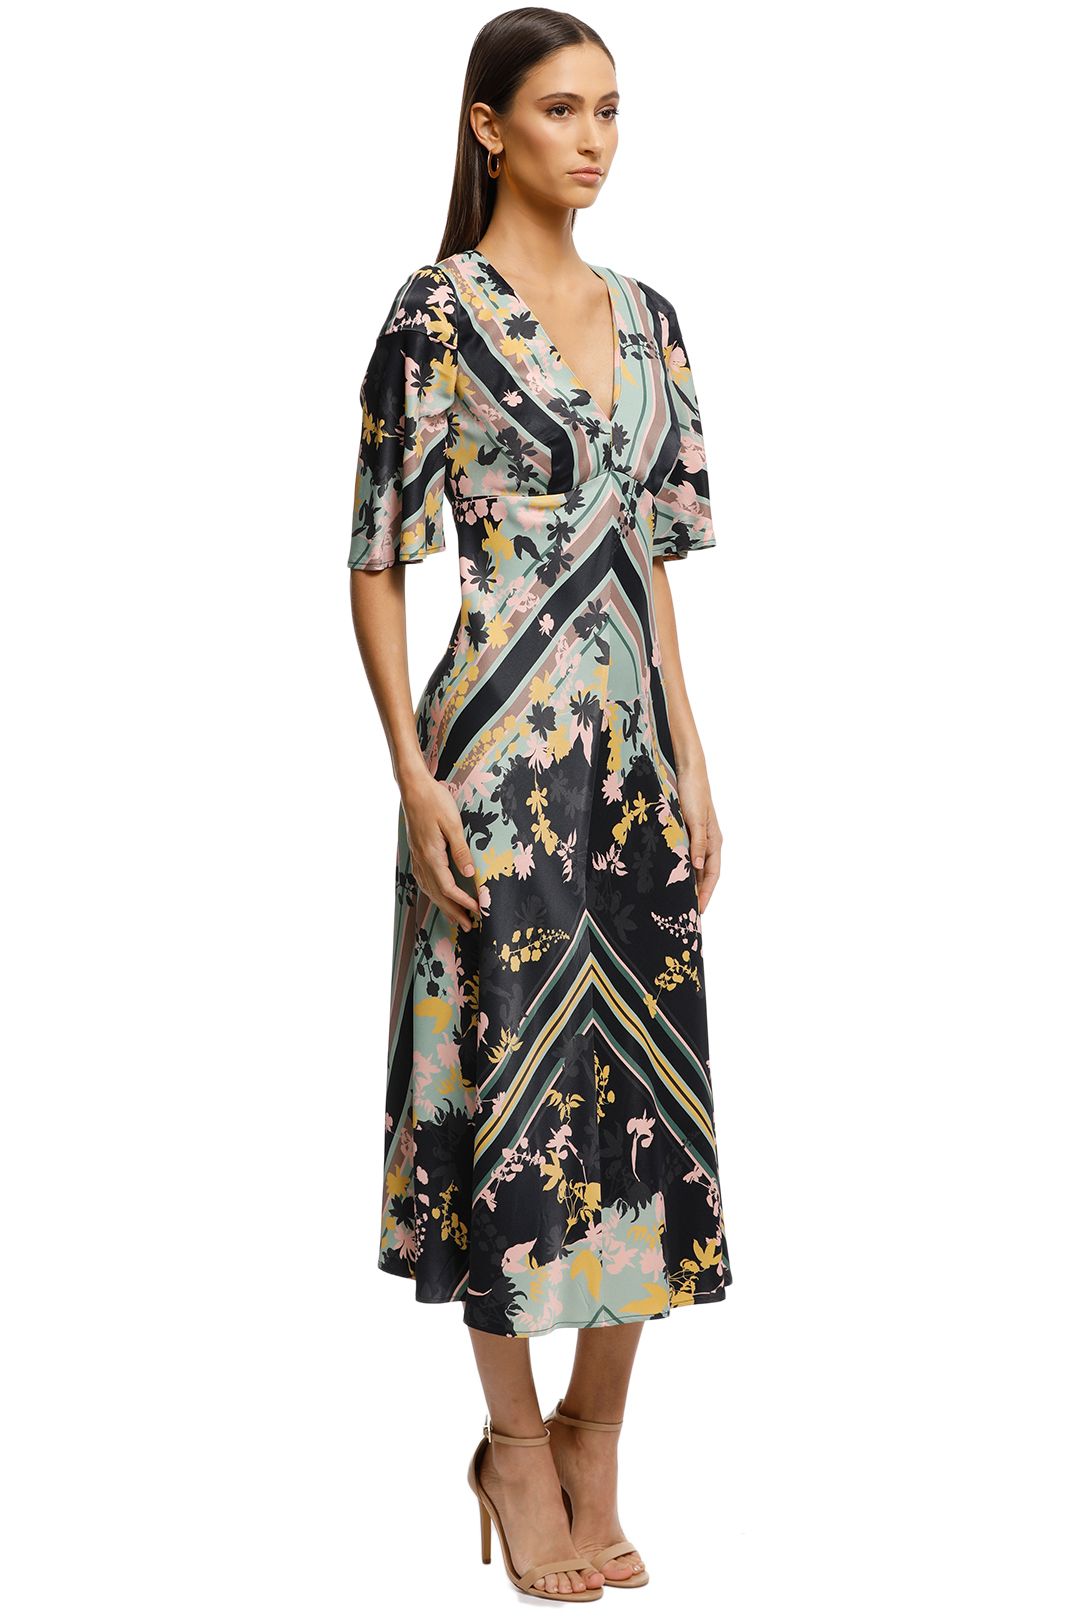 Moss-and-Spy-Mayflower-Dress-Floral-Side